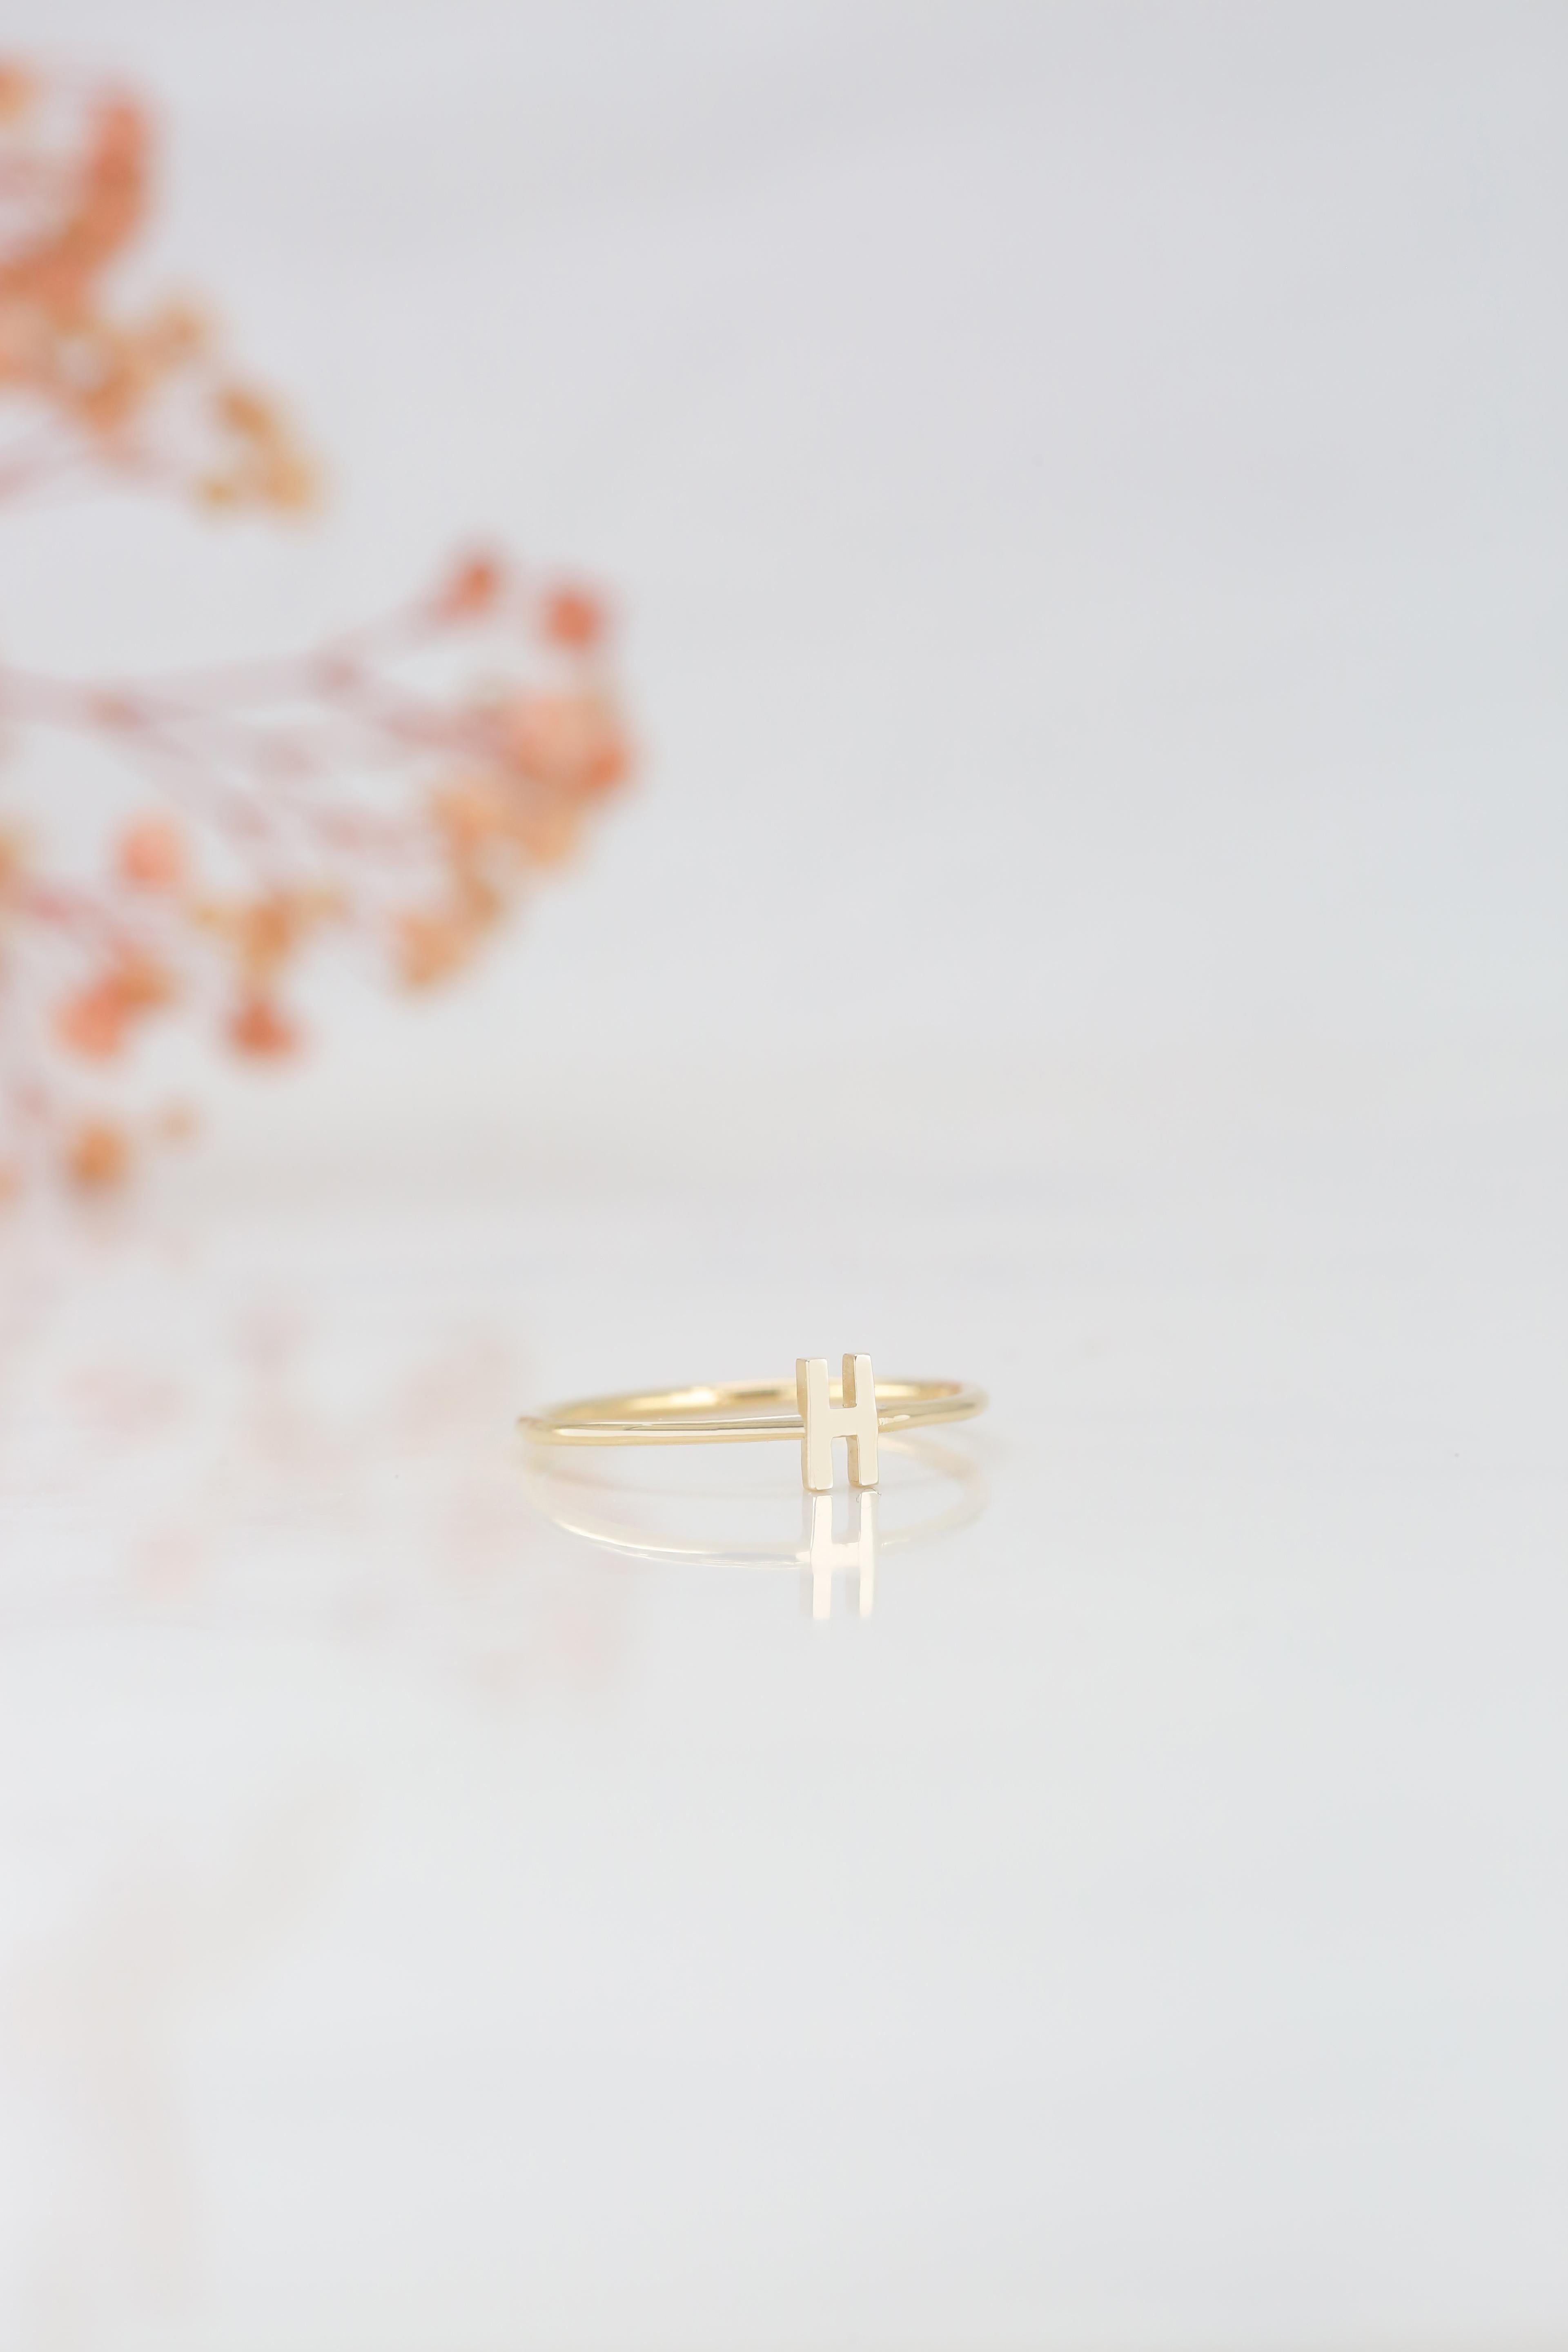 For Sale:  14K Gold Initial H Letter Ring, Personalized Initial Letter Ring 7